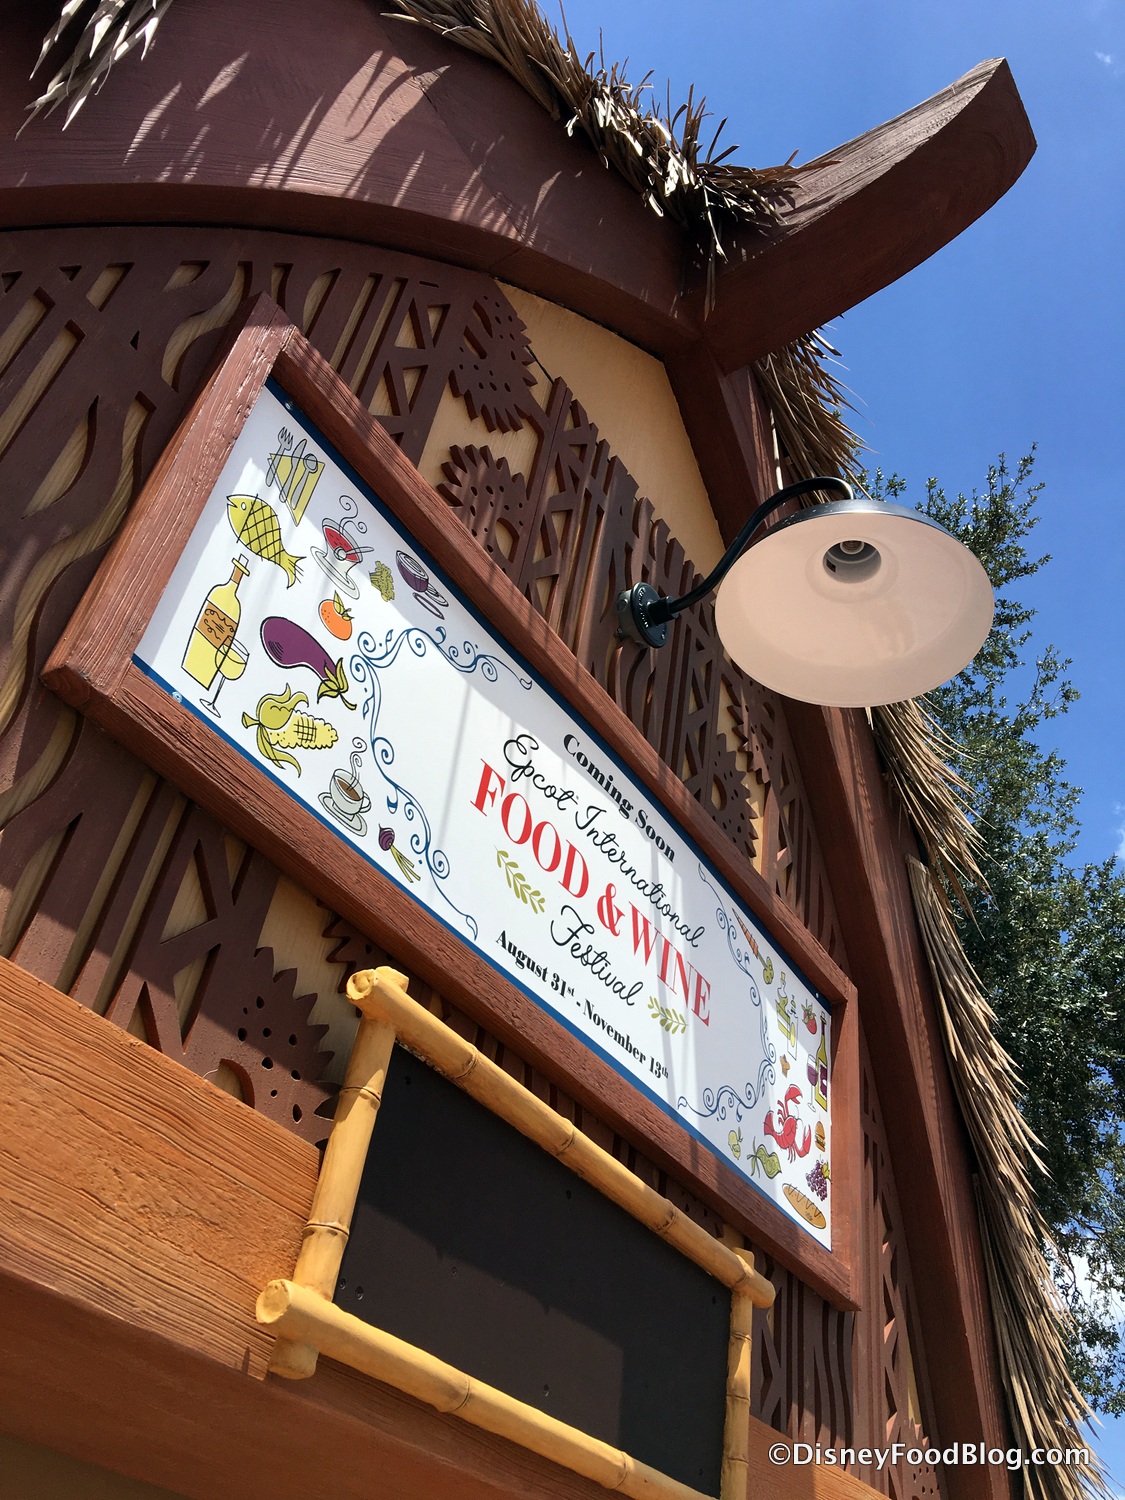 Sneak Peek: New Marketplace Booths Created for 2017 Epcot Food and Wine